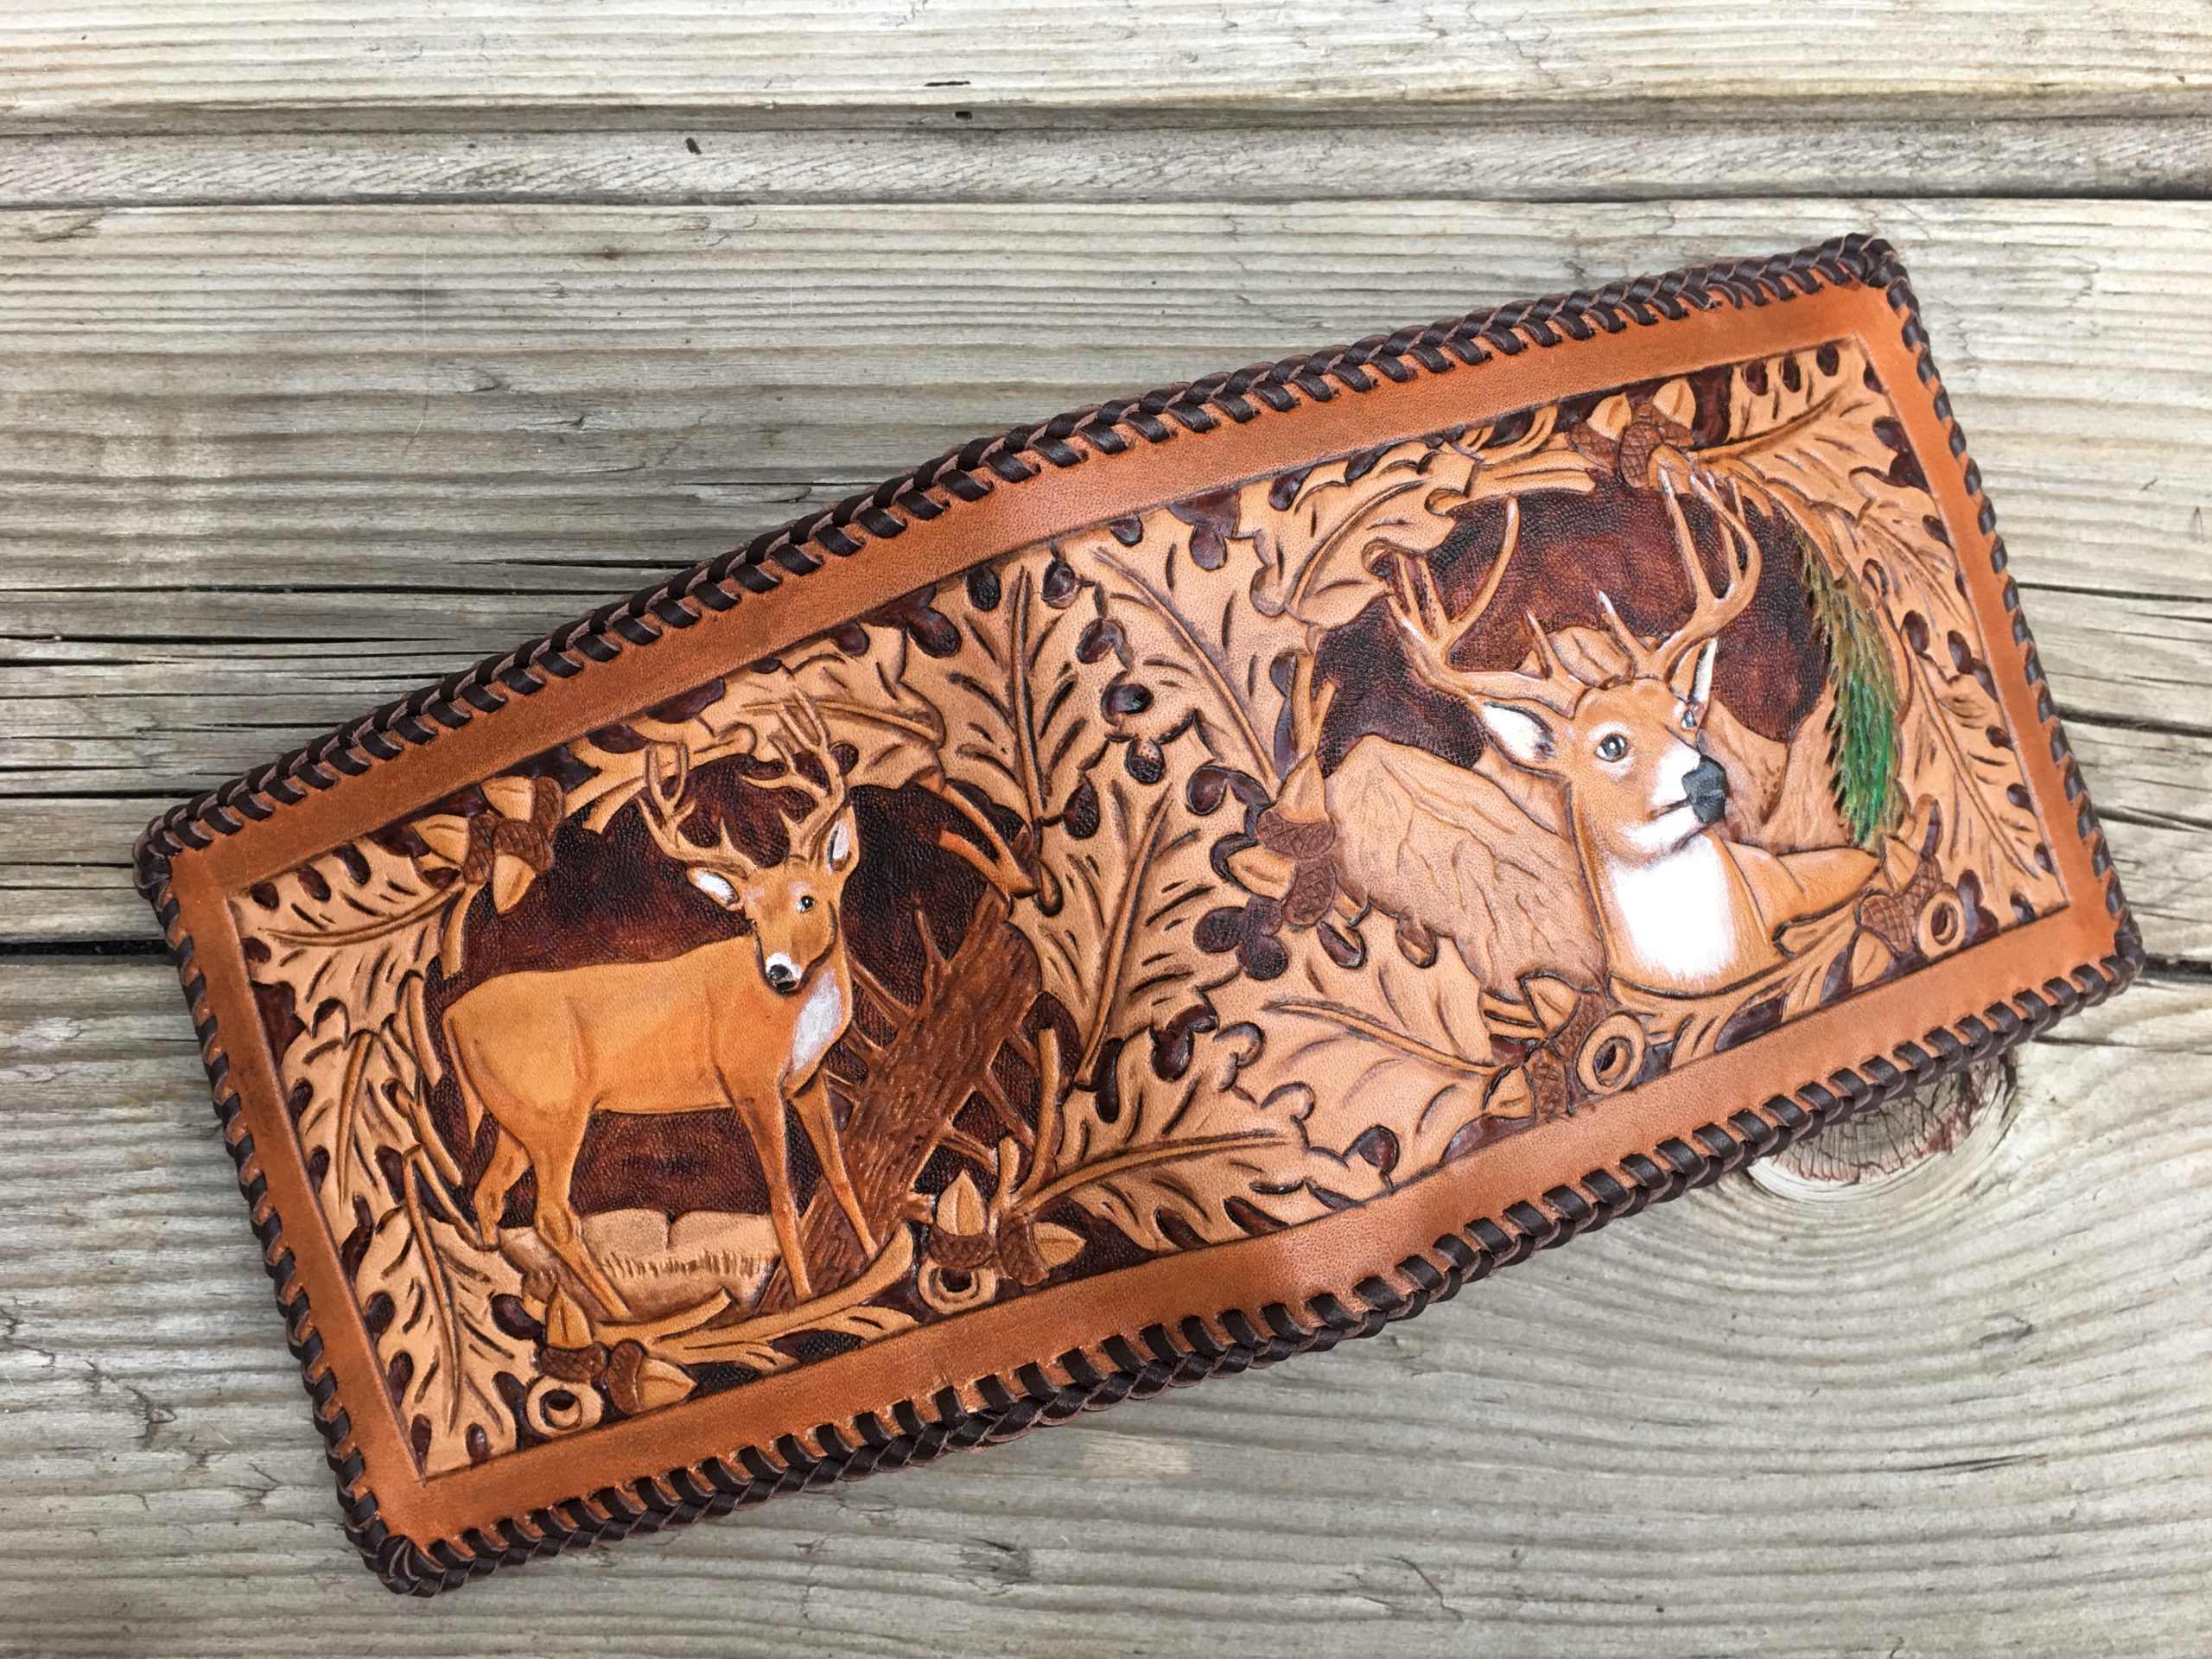  Men's 3D Genuine Leather Wallet, Hand-Carved, Hand-Painted,  Leather Carving, Custom wallet, Personalized wallet, Deer wallet,  Outdoorsman : Handmade Products